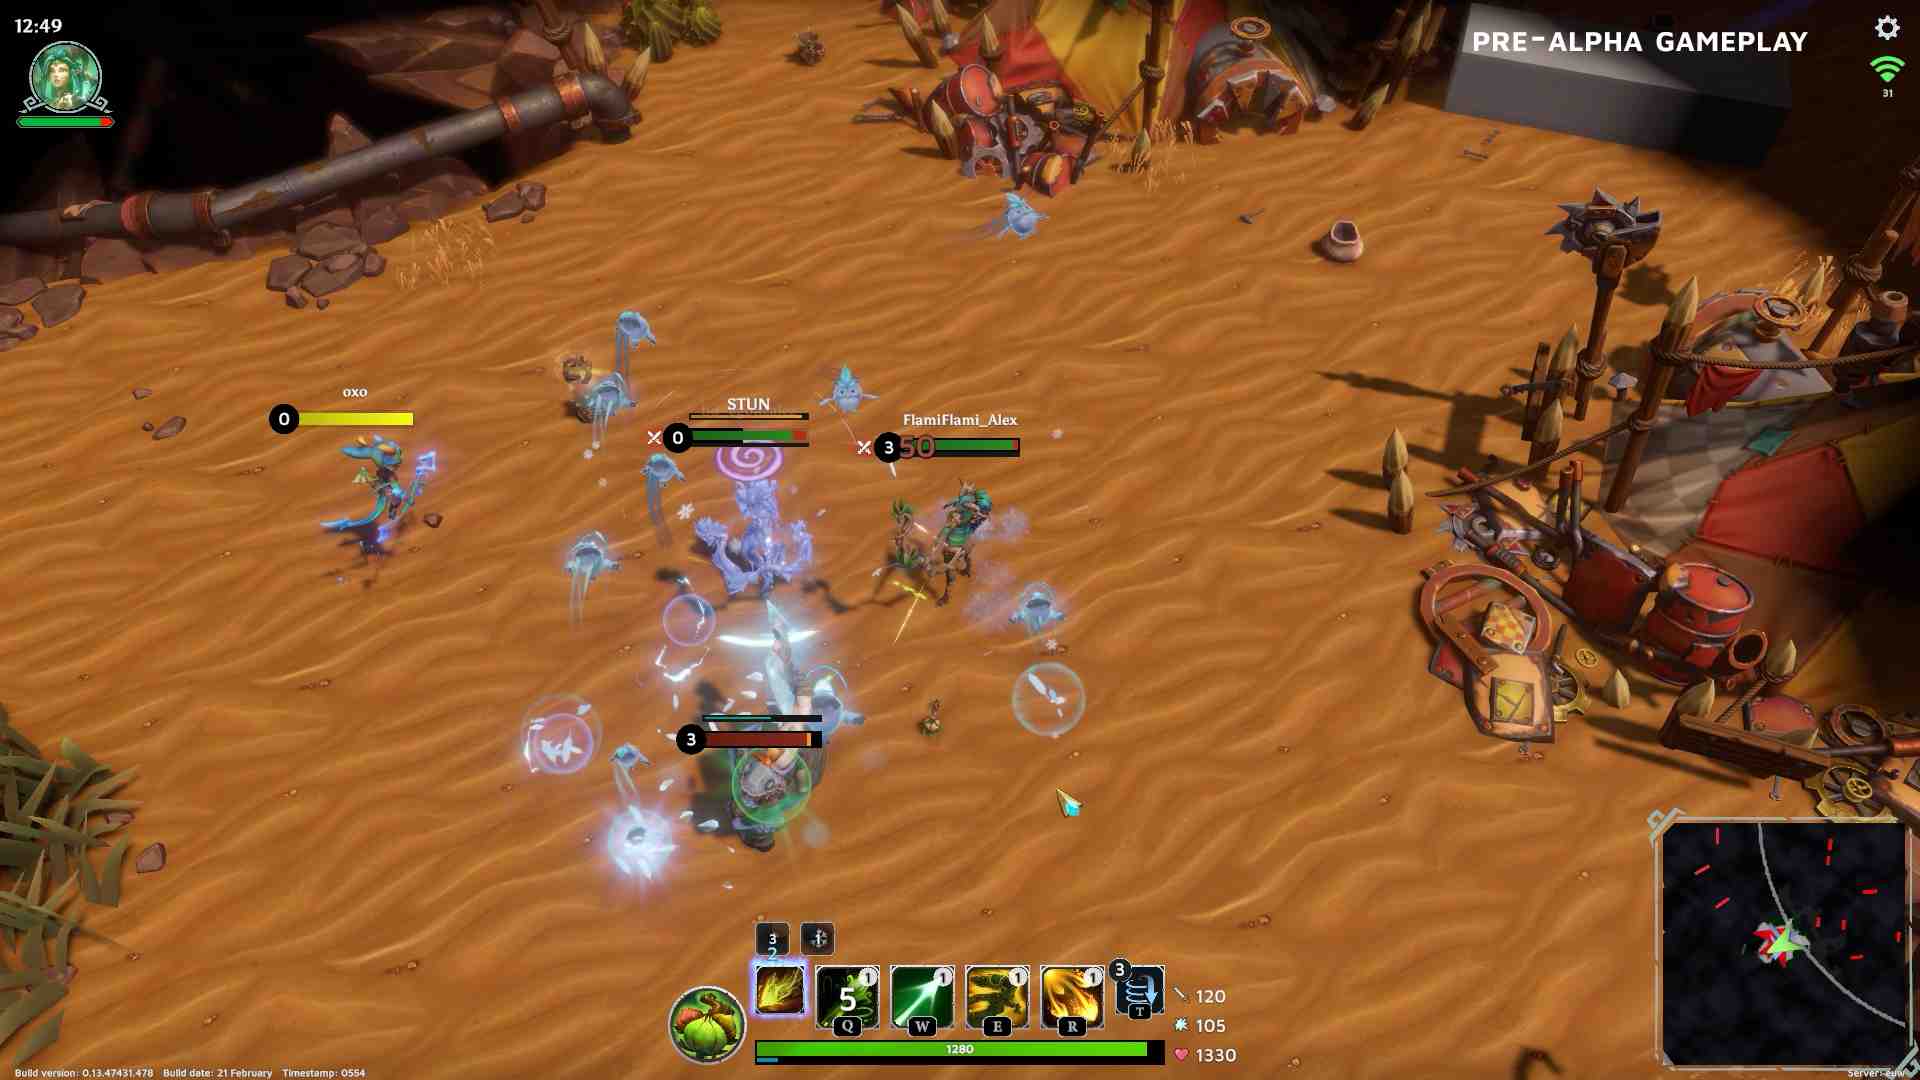 In game screenshot of a team running for objectives in the desert.